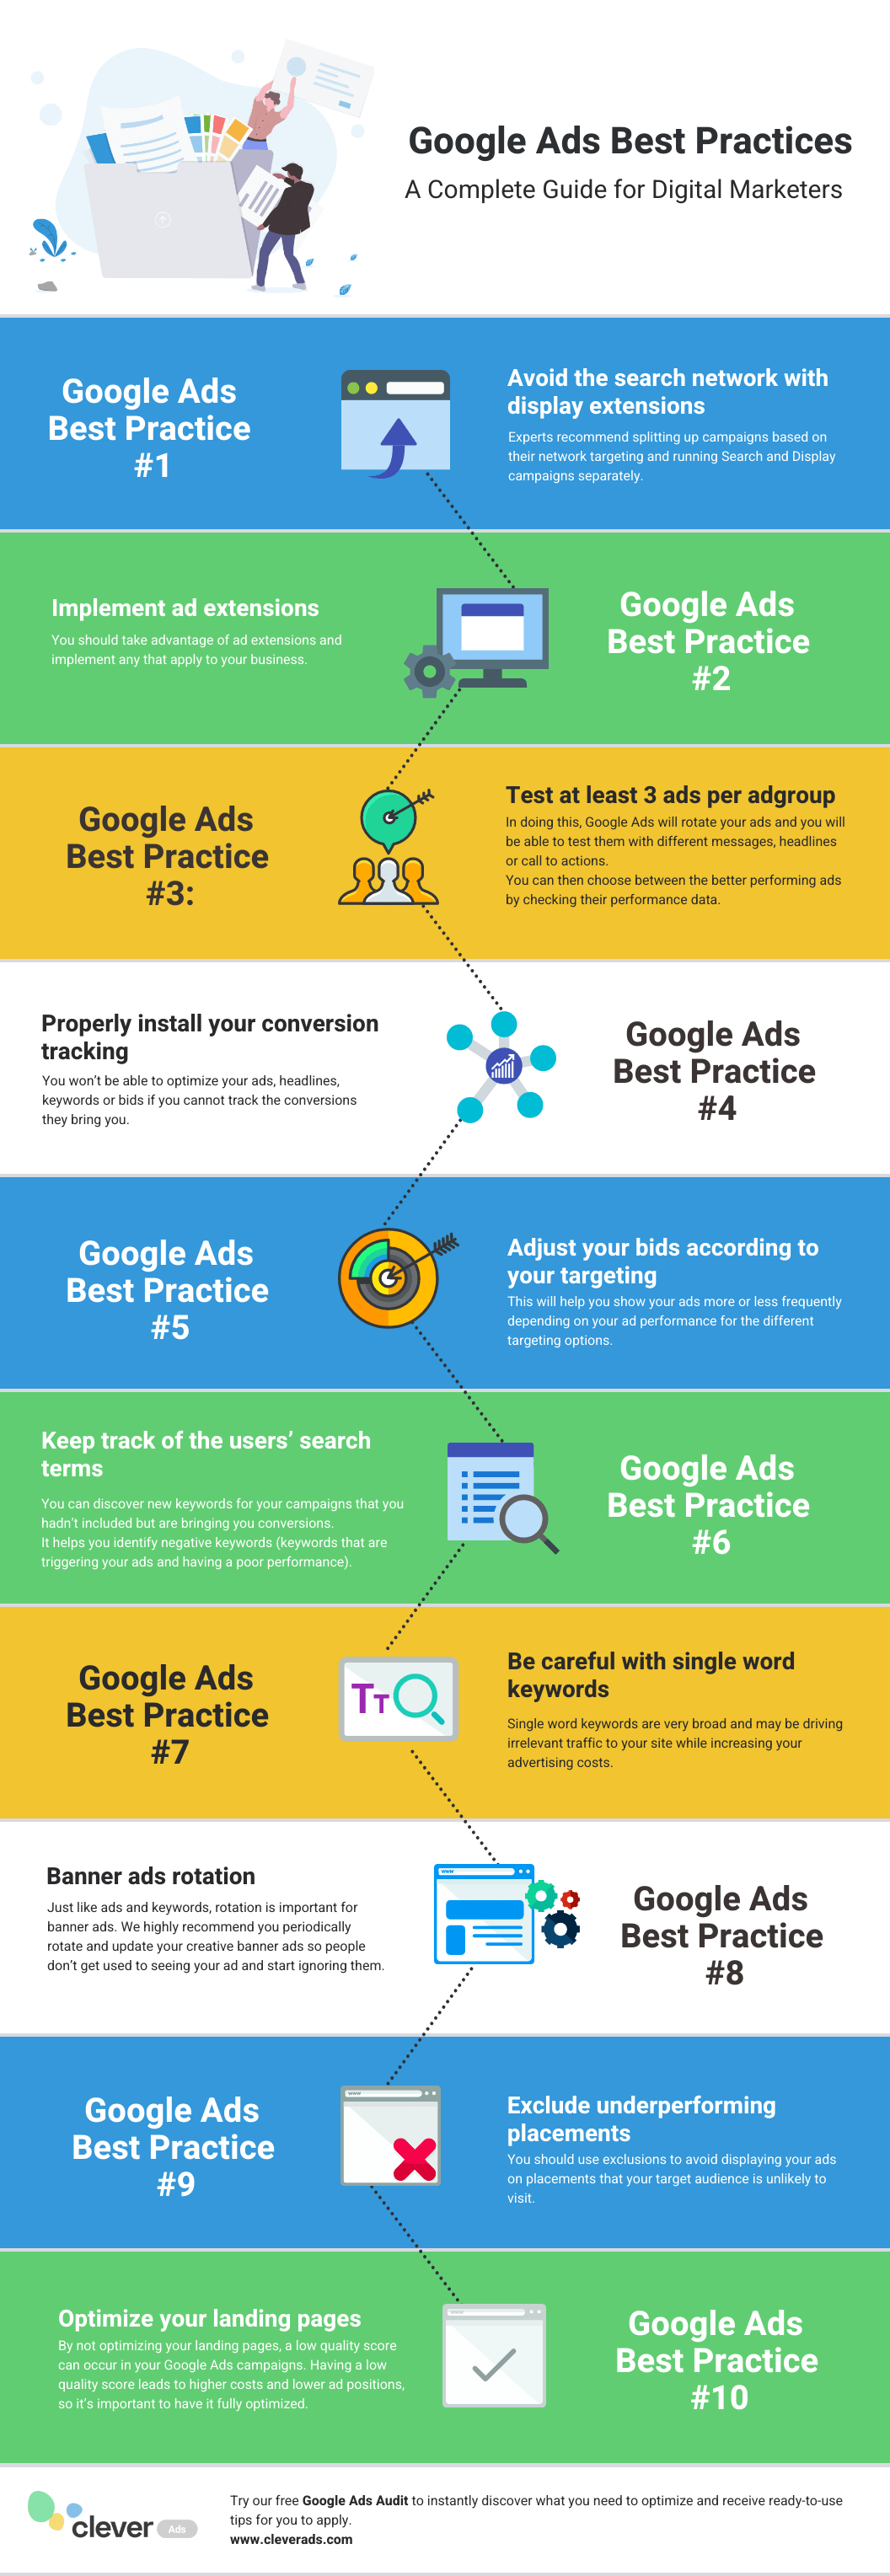 What is Google ad best practice?